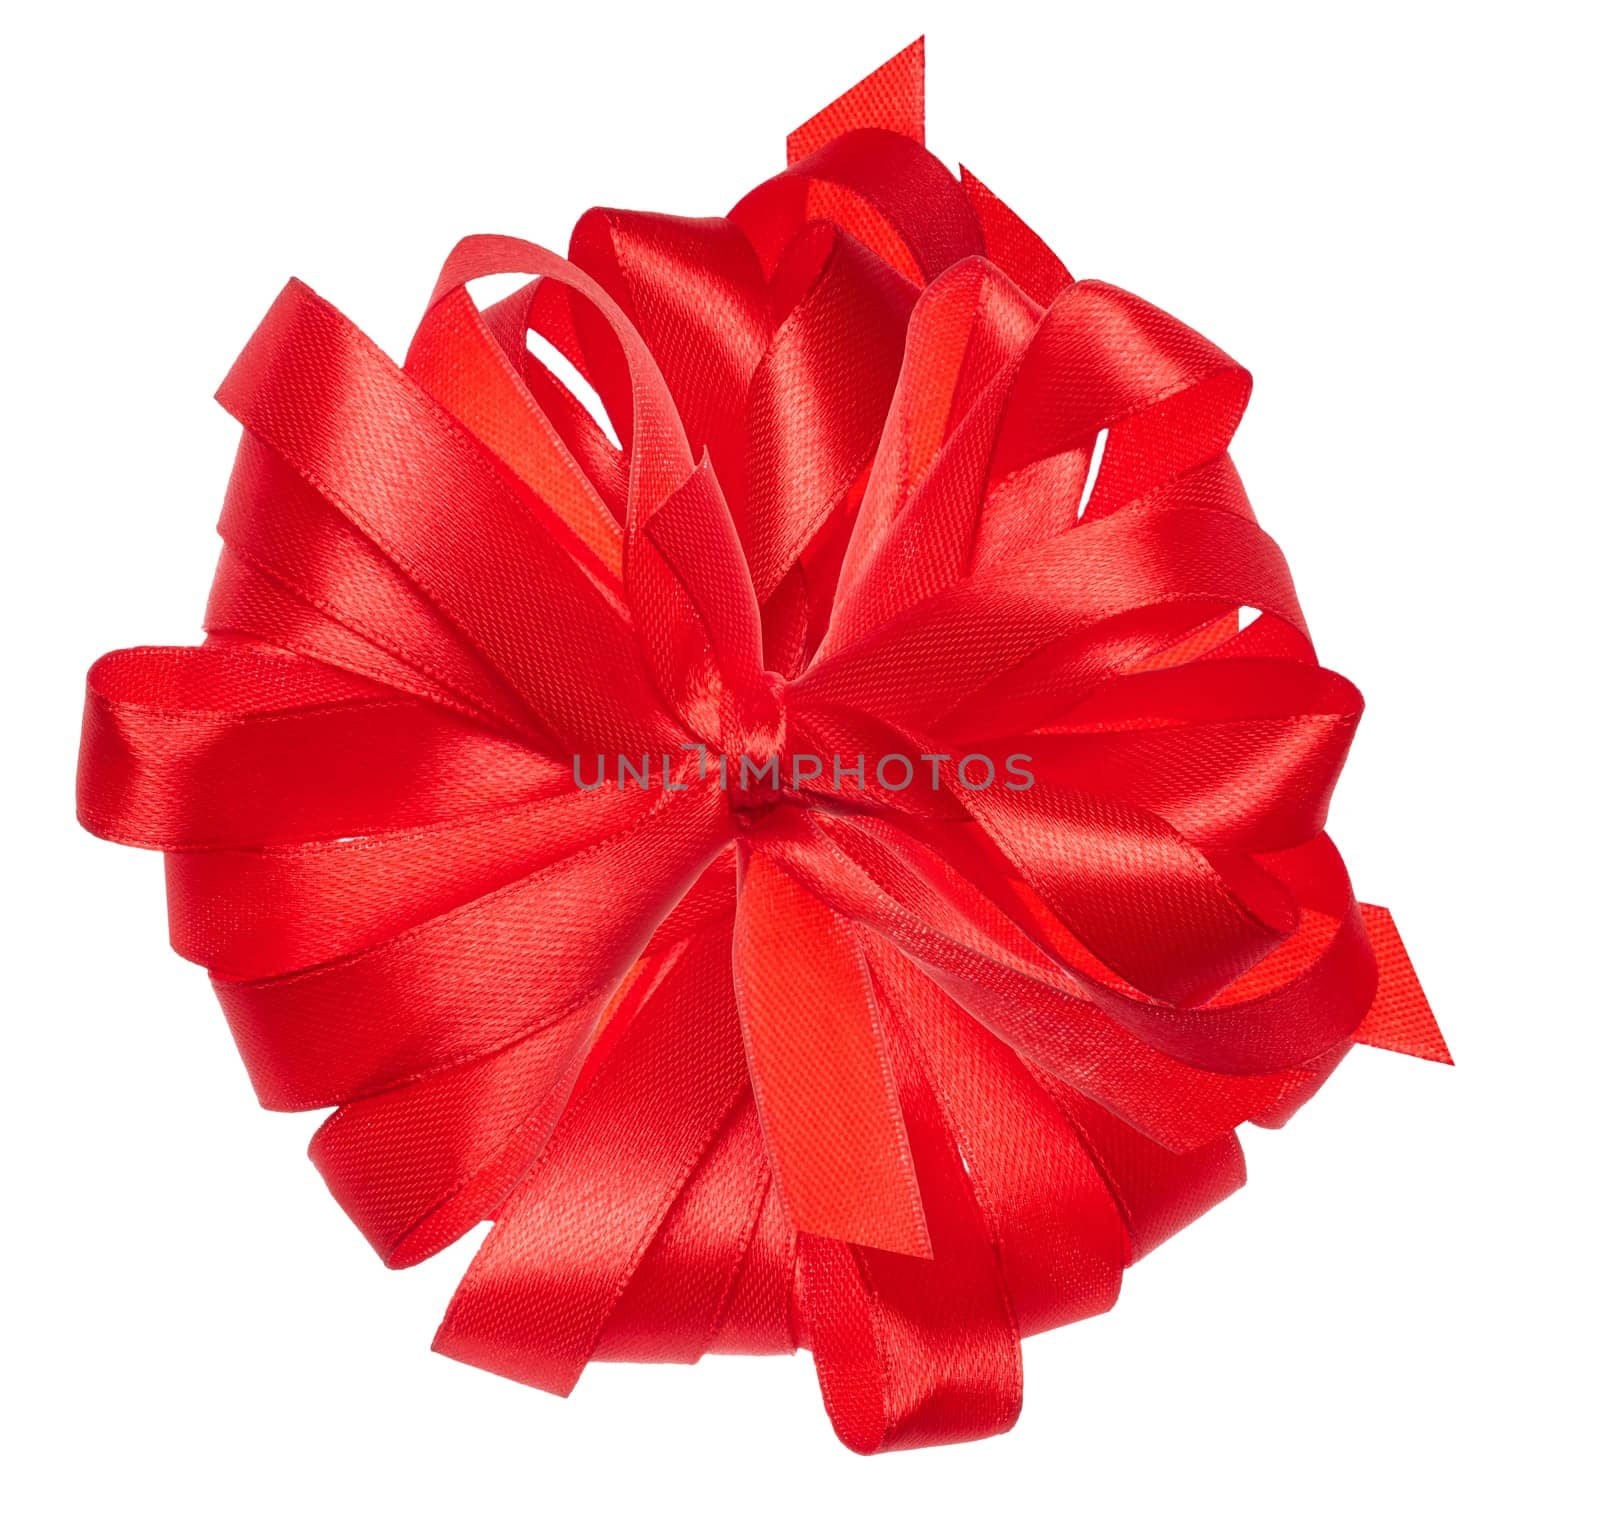 Knotted red satin ribbon bow on isolated background, top view